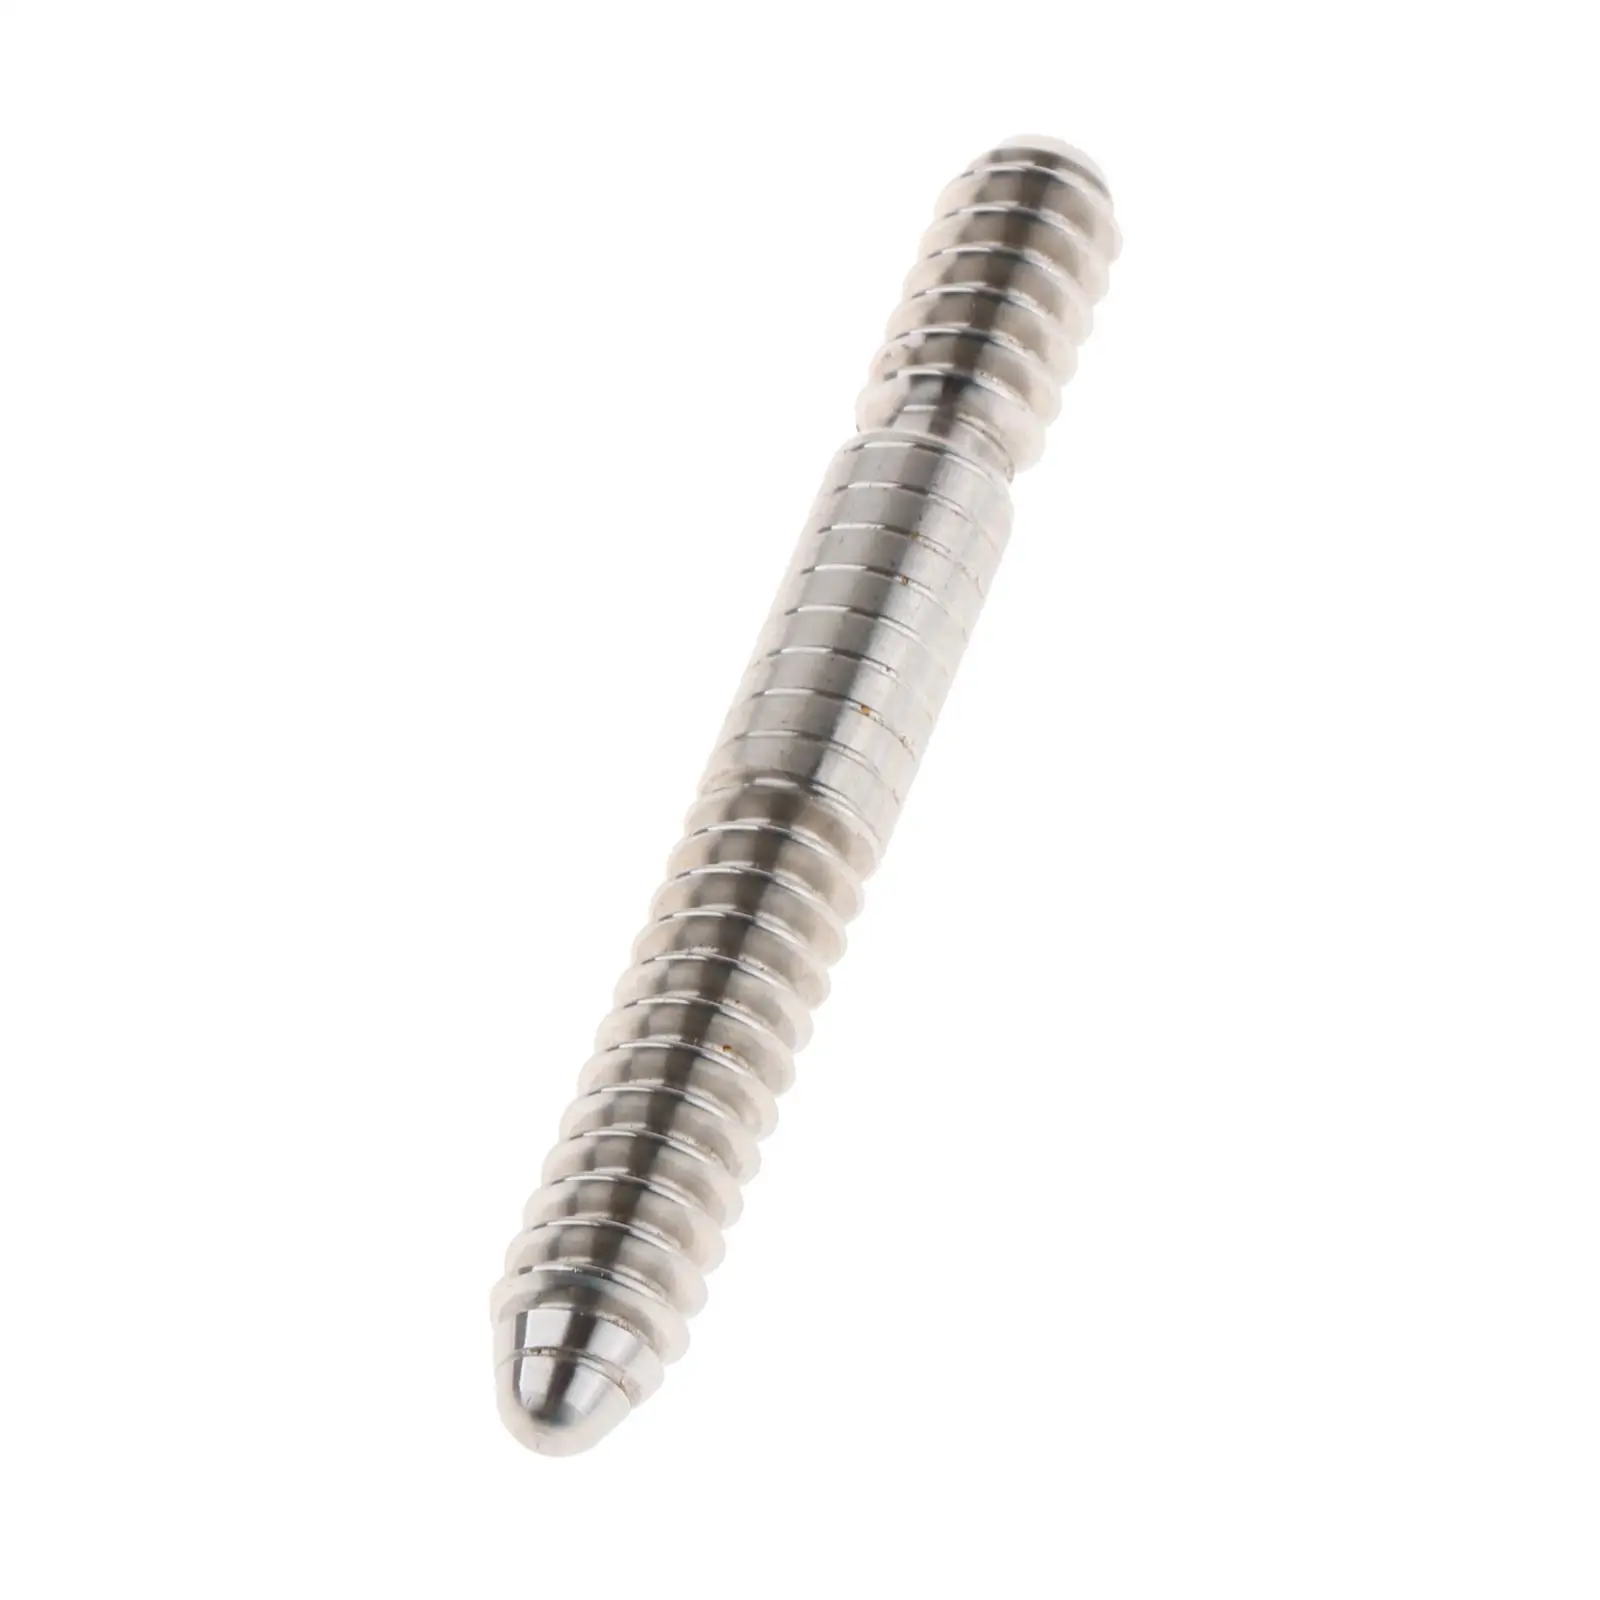 Billiards Pool Cue Joint Pin Stainless Steel Sturdy Pool Cue Joint Screws